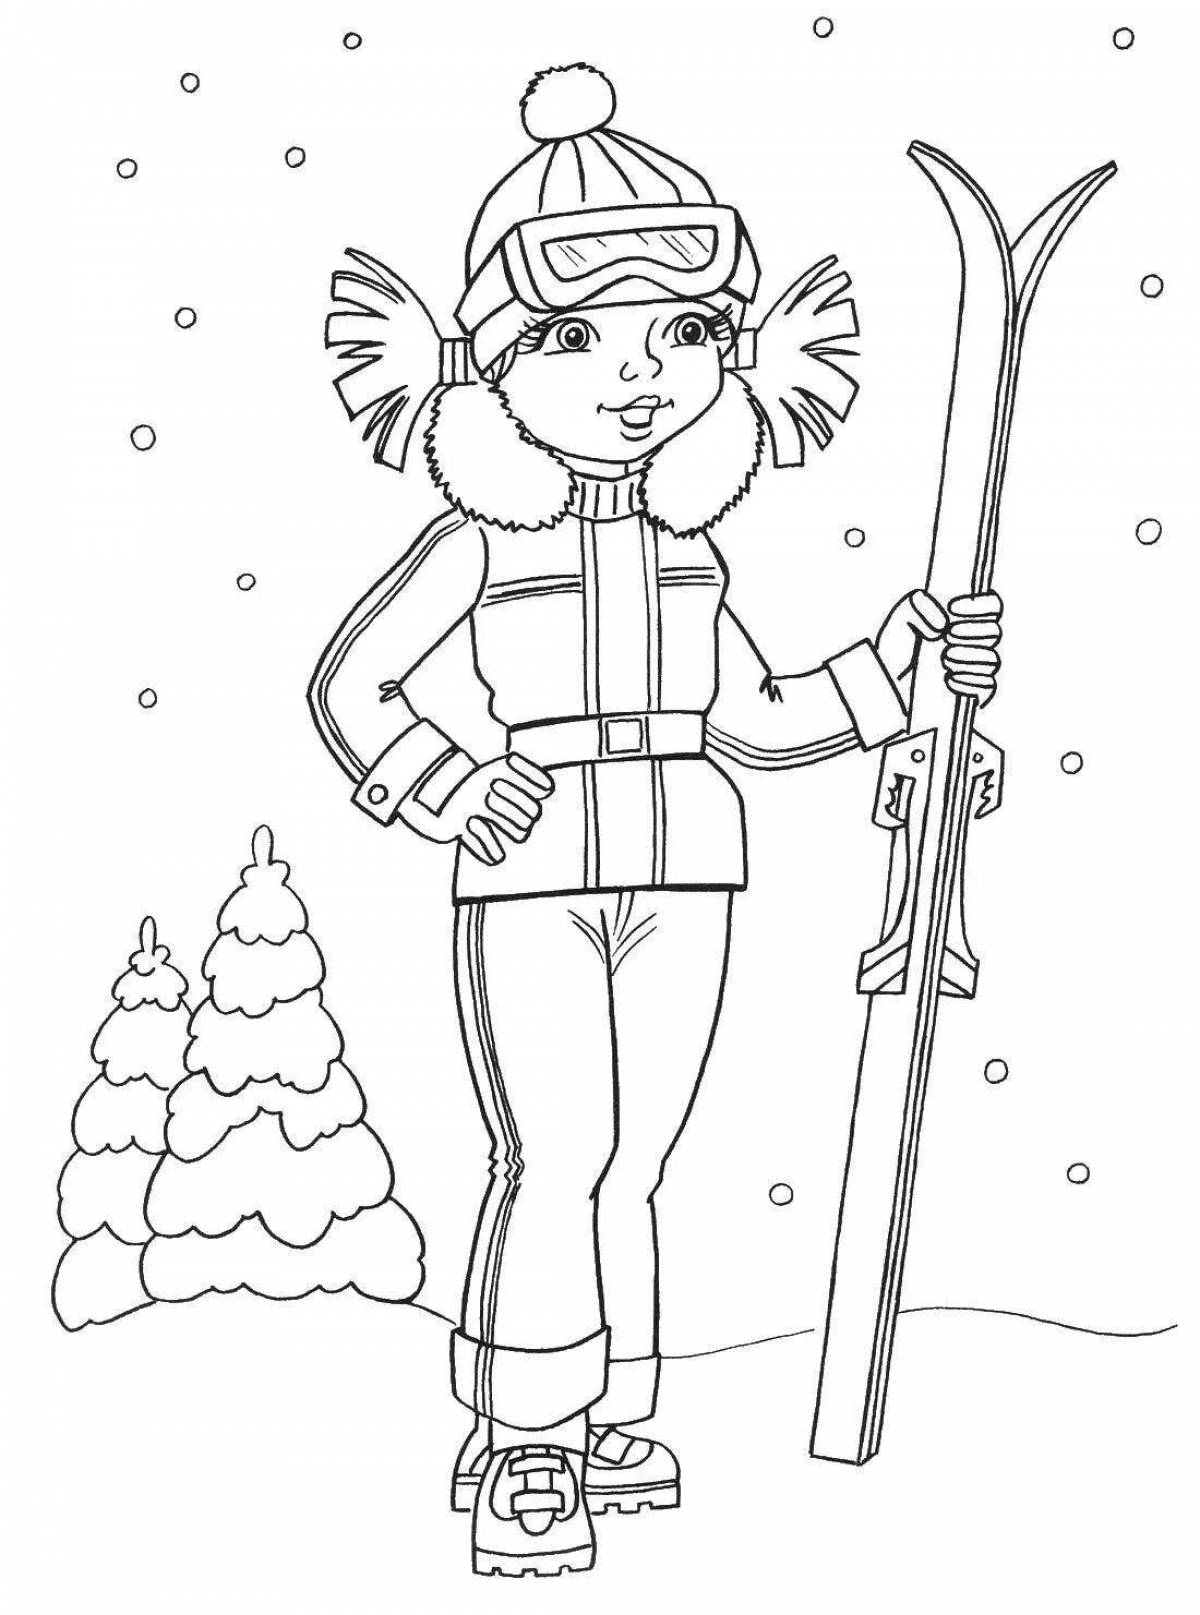 Coloring book determined baby skier